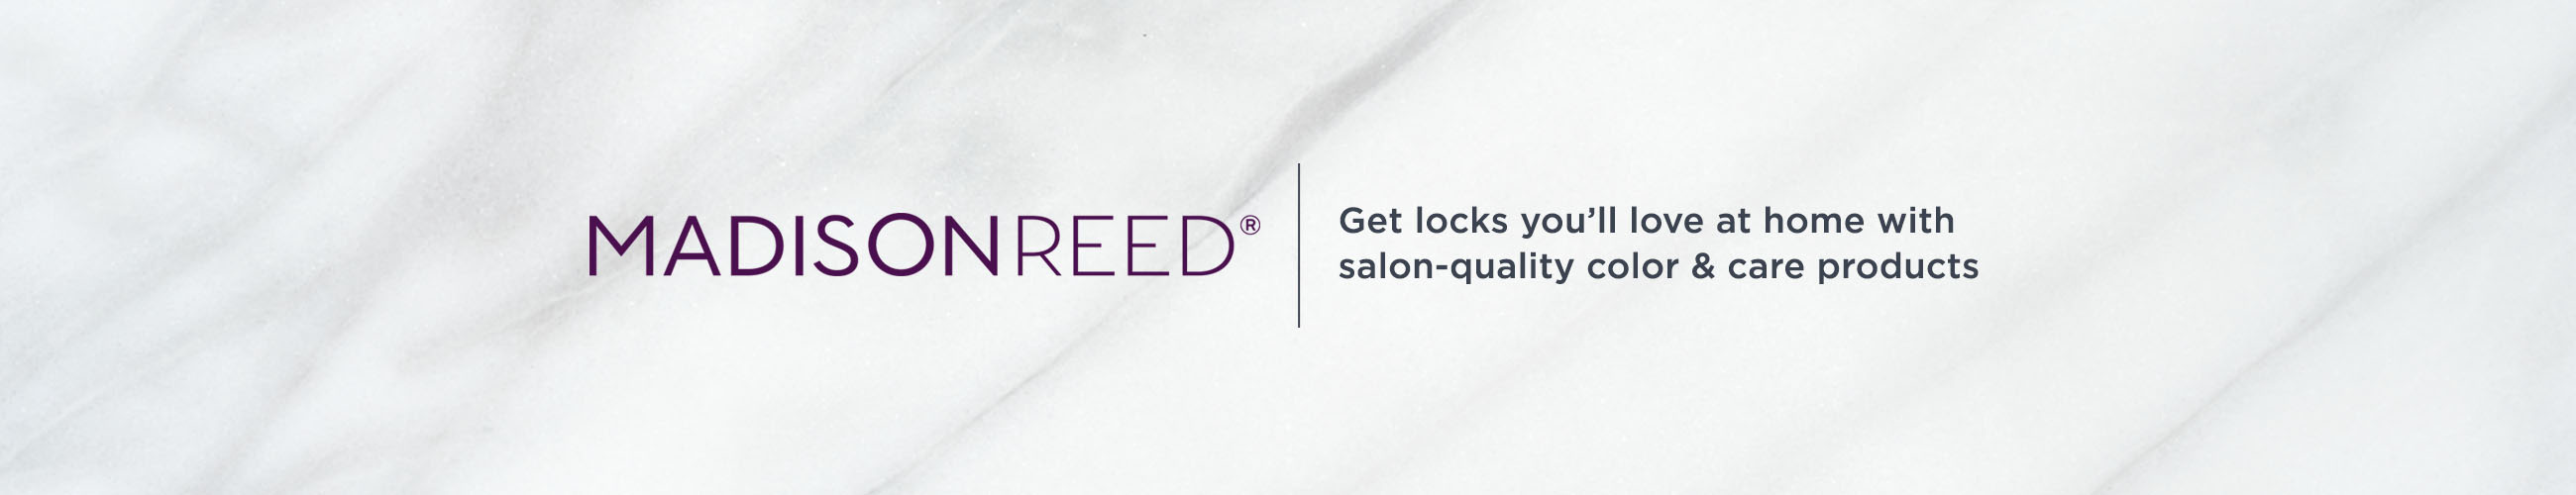 Madison Reed - Get locks you'll love at home with salon-quality color & care products